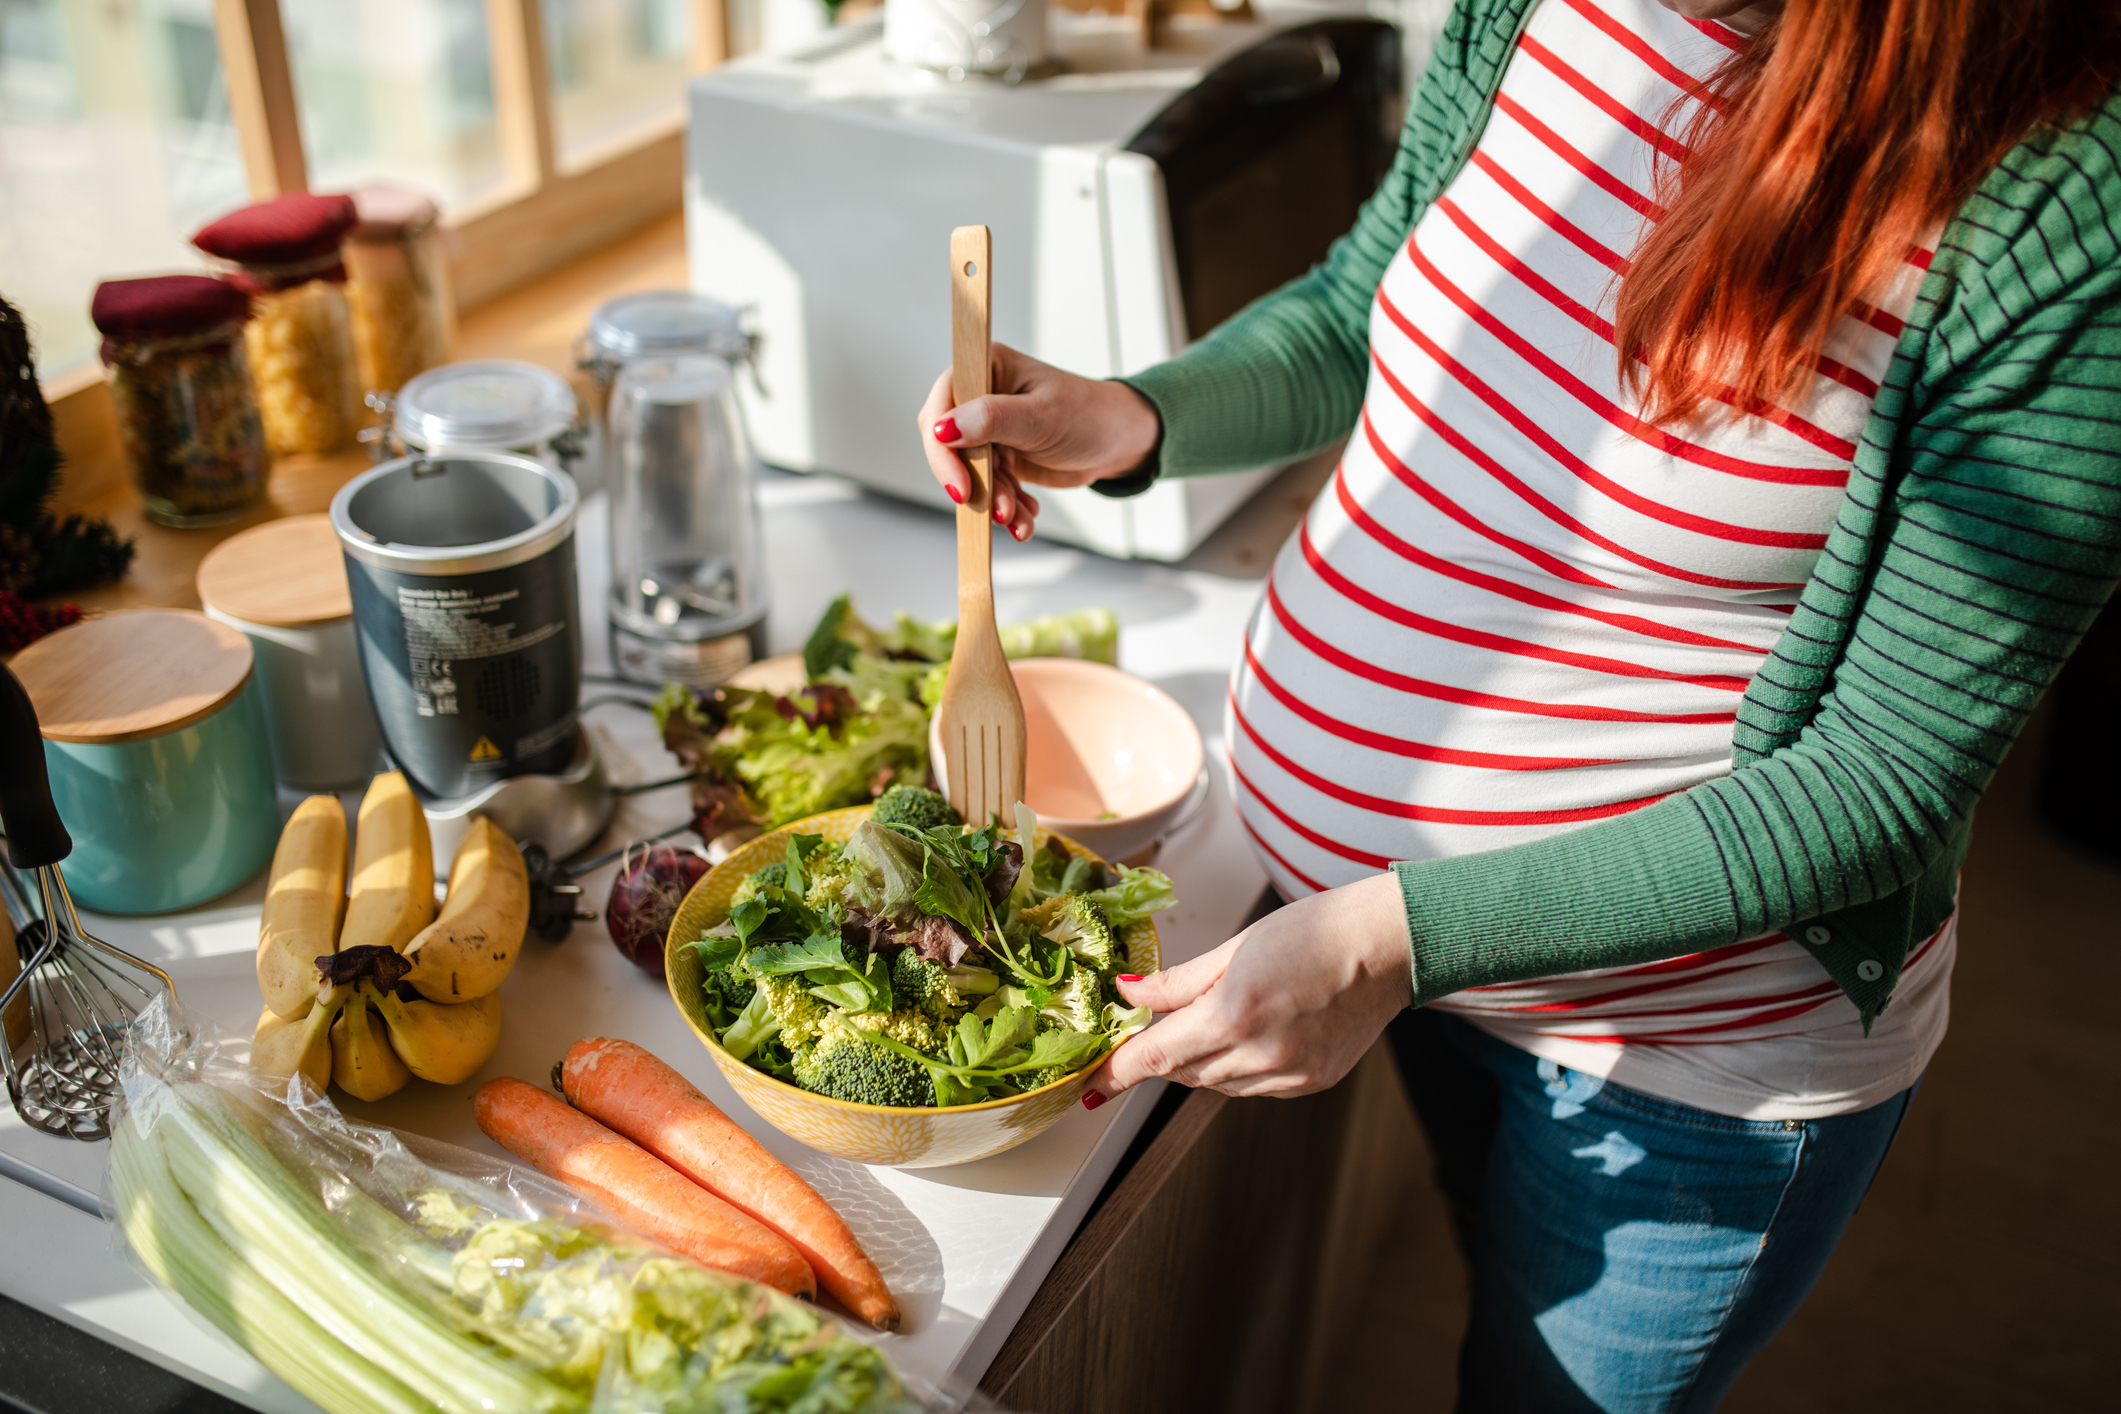 Healthy diet before and during pregnancy linked to lower risk of complications, NIH study suggests